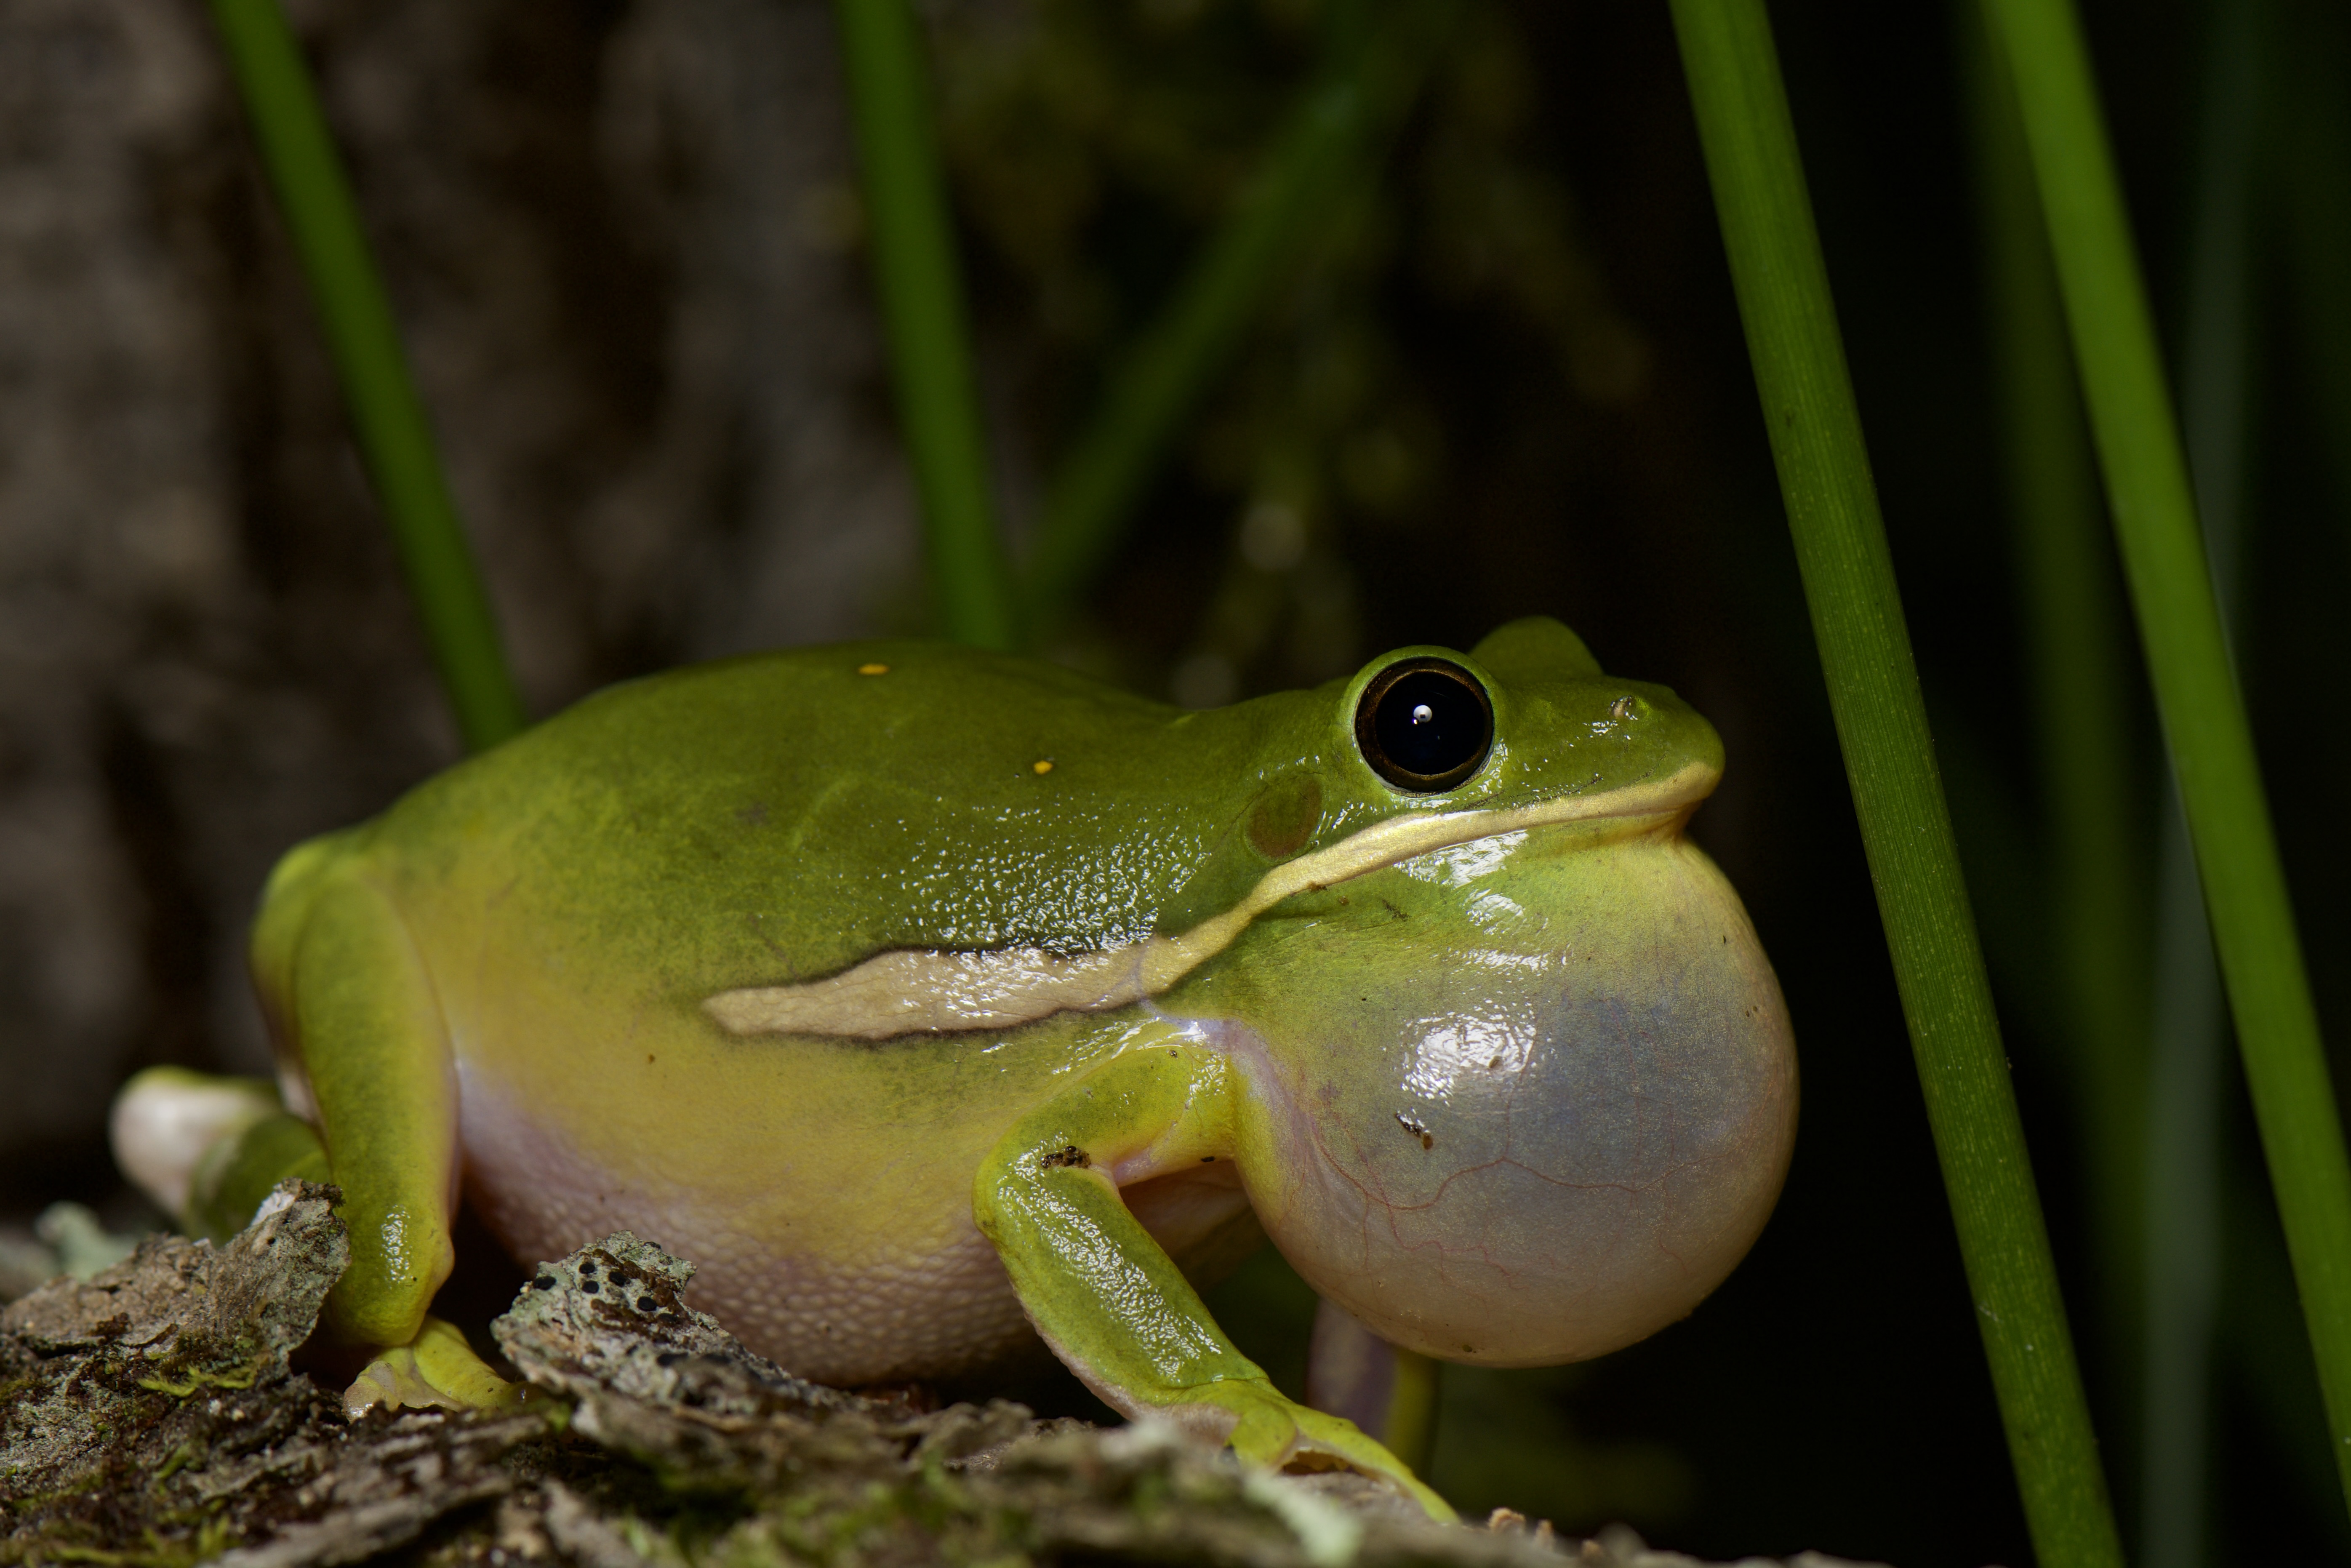 Male green treefrog (Hyla cinerea) with inflated vocal sac.  Males make a loud, repetitive "QUONK" sound to attract females and help lucky researchers find them. Photo by Kathleen Webster.